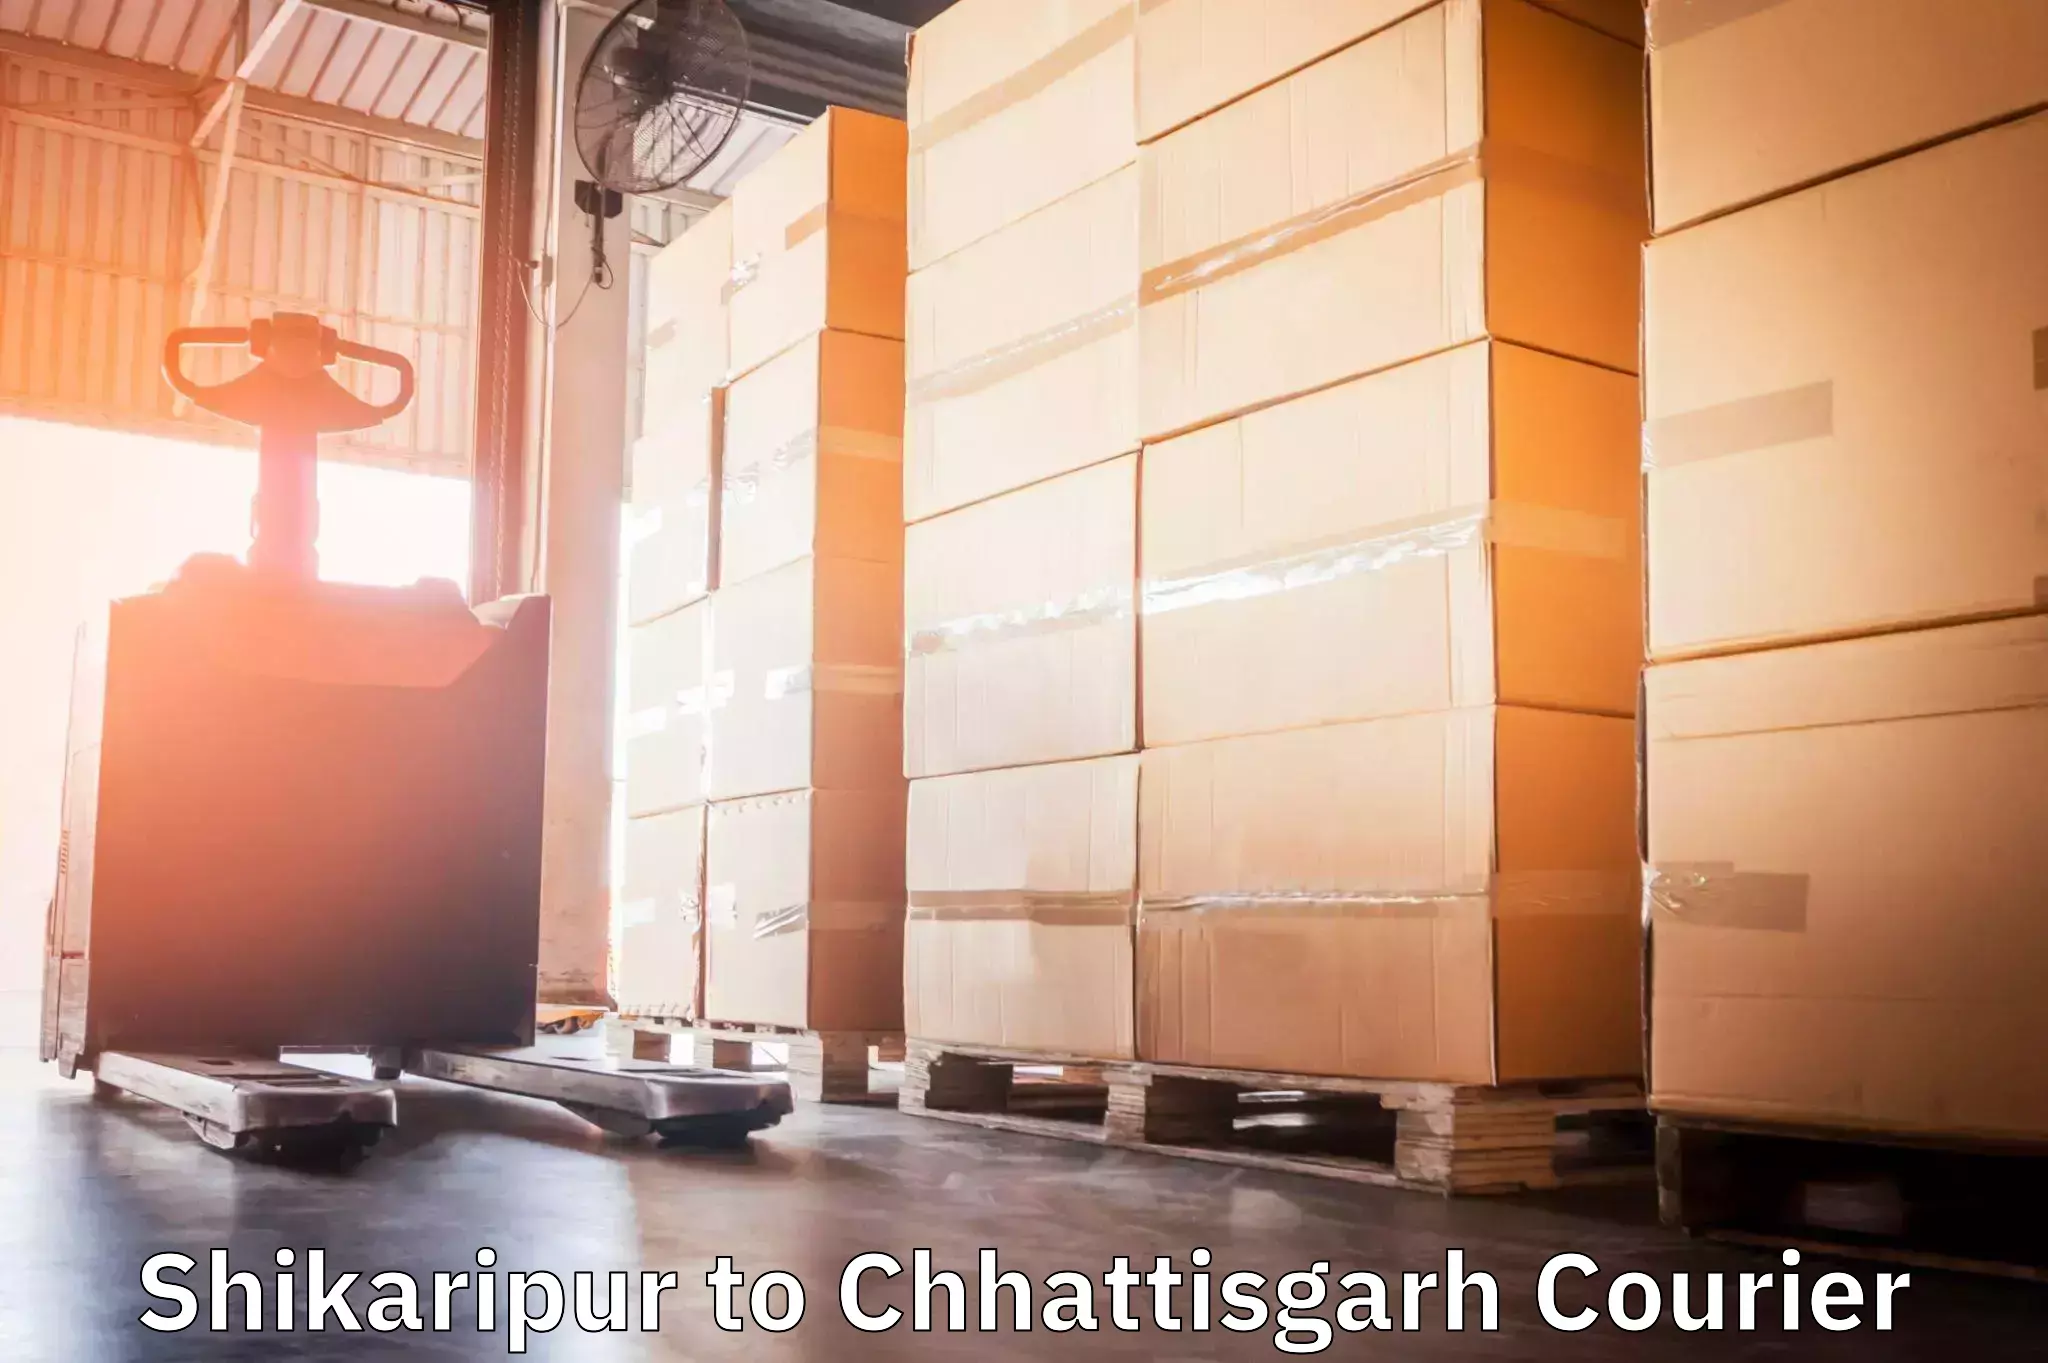 Round-the-clock parcel delivery in Shikaripur to Chhattisgarh